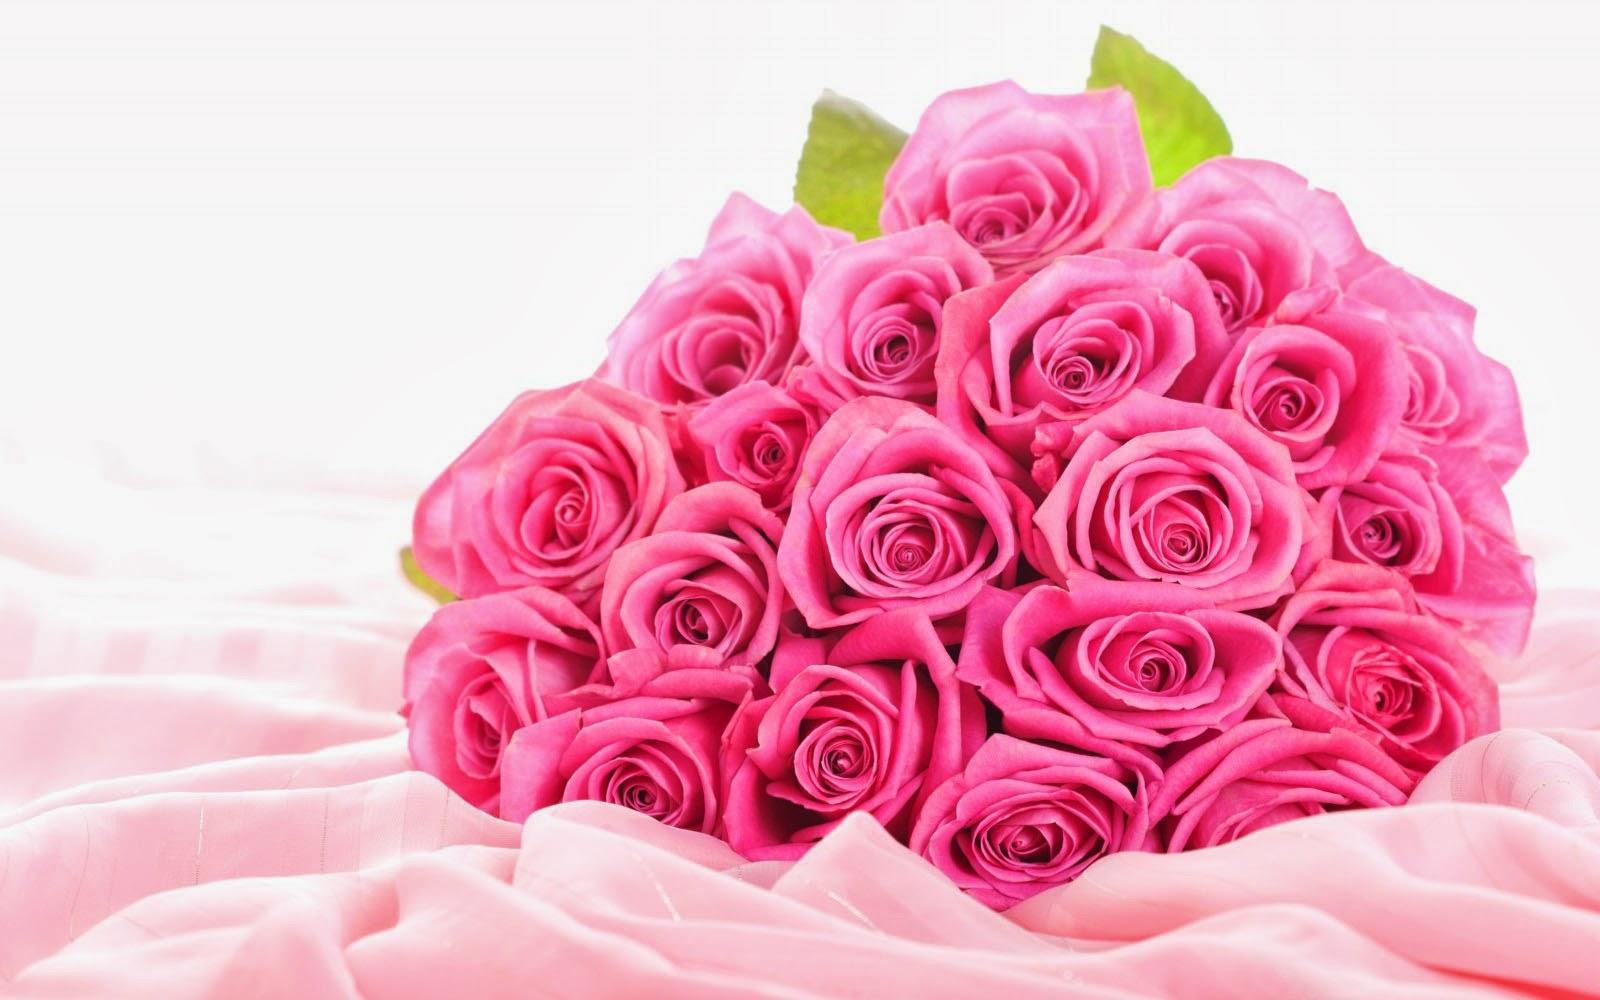 unityopportunity: Pink Rose Bouquet Wallpaper